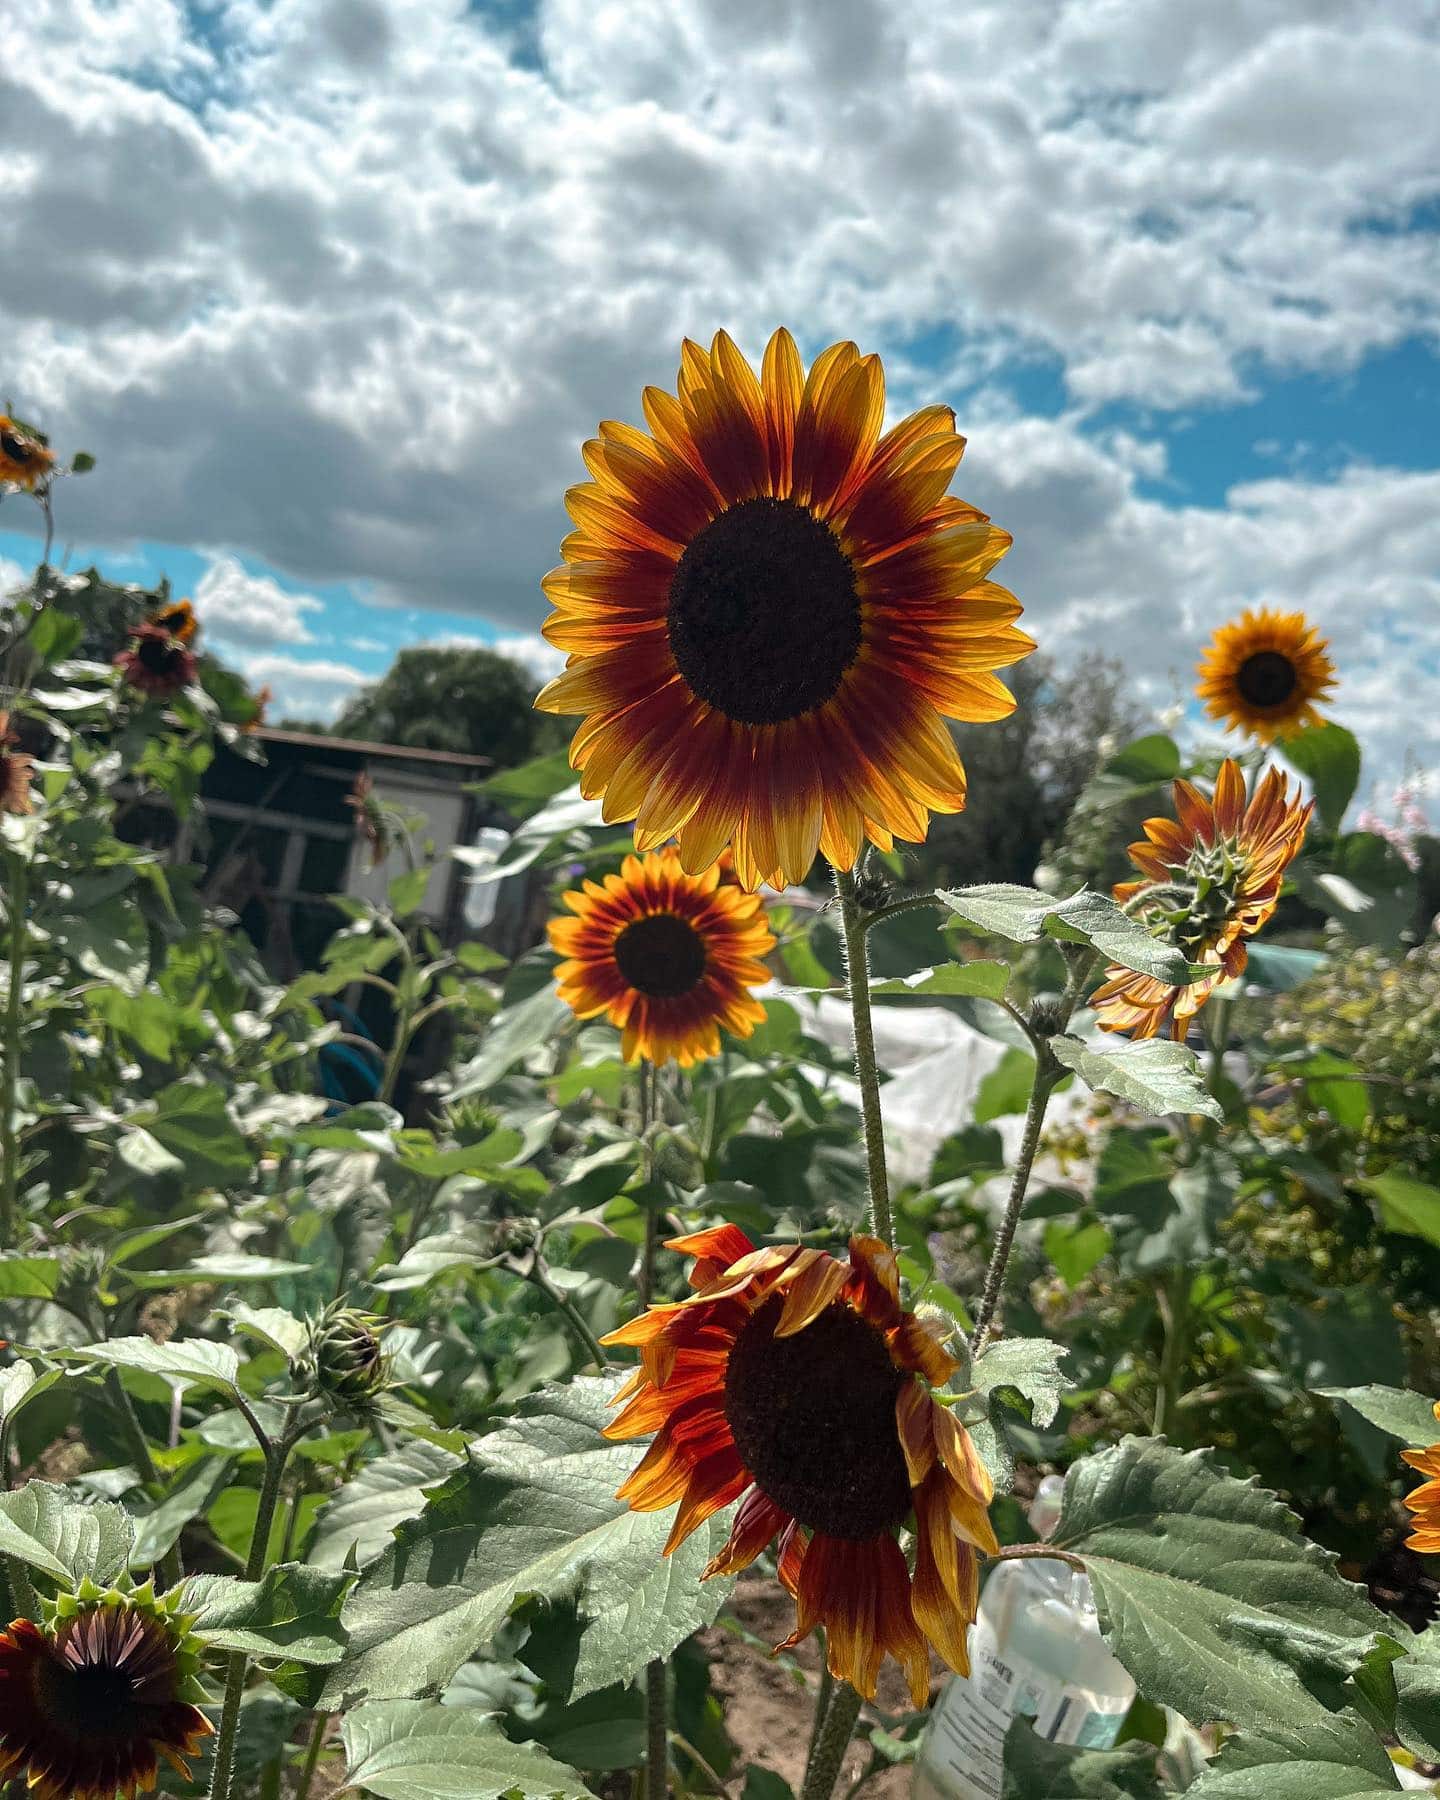 My account seems to be turning into a nature/wildlife account and I LOVE it 🌻
-
#natureblogger #wildlifeblogger #sunflowersofinstagram #naturephotography #wildlifephotography #homegrownsunflowers